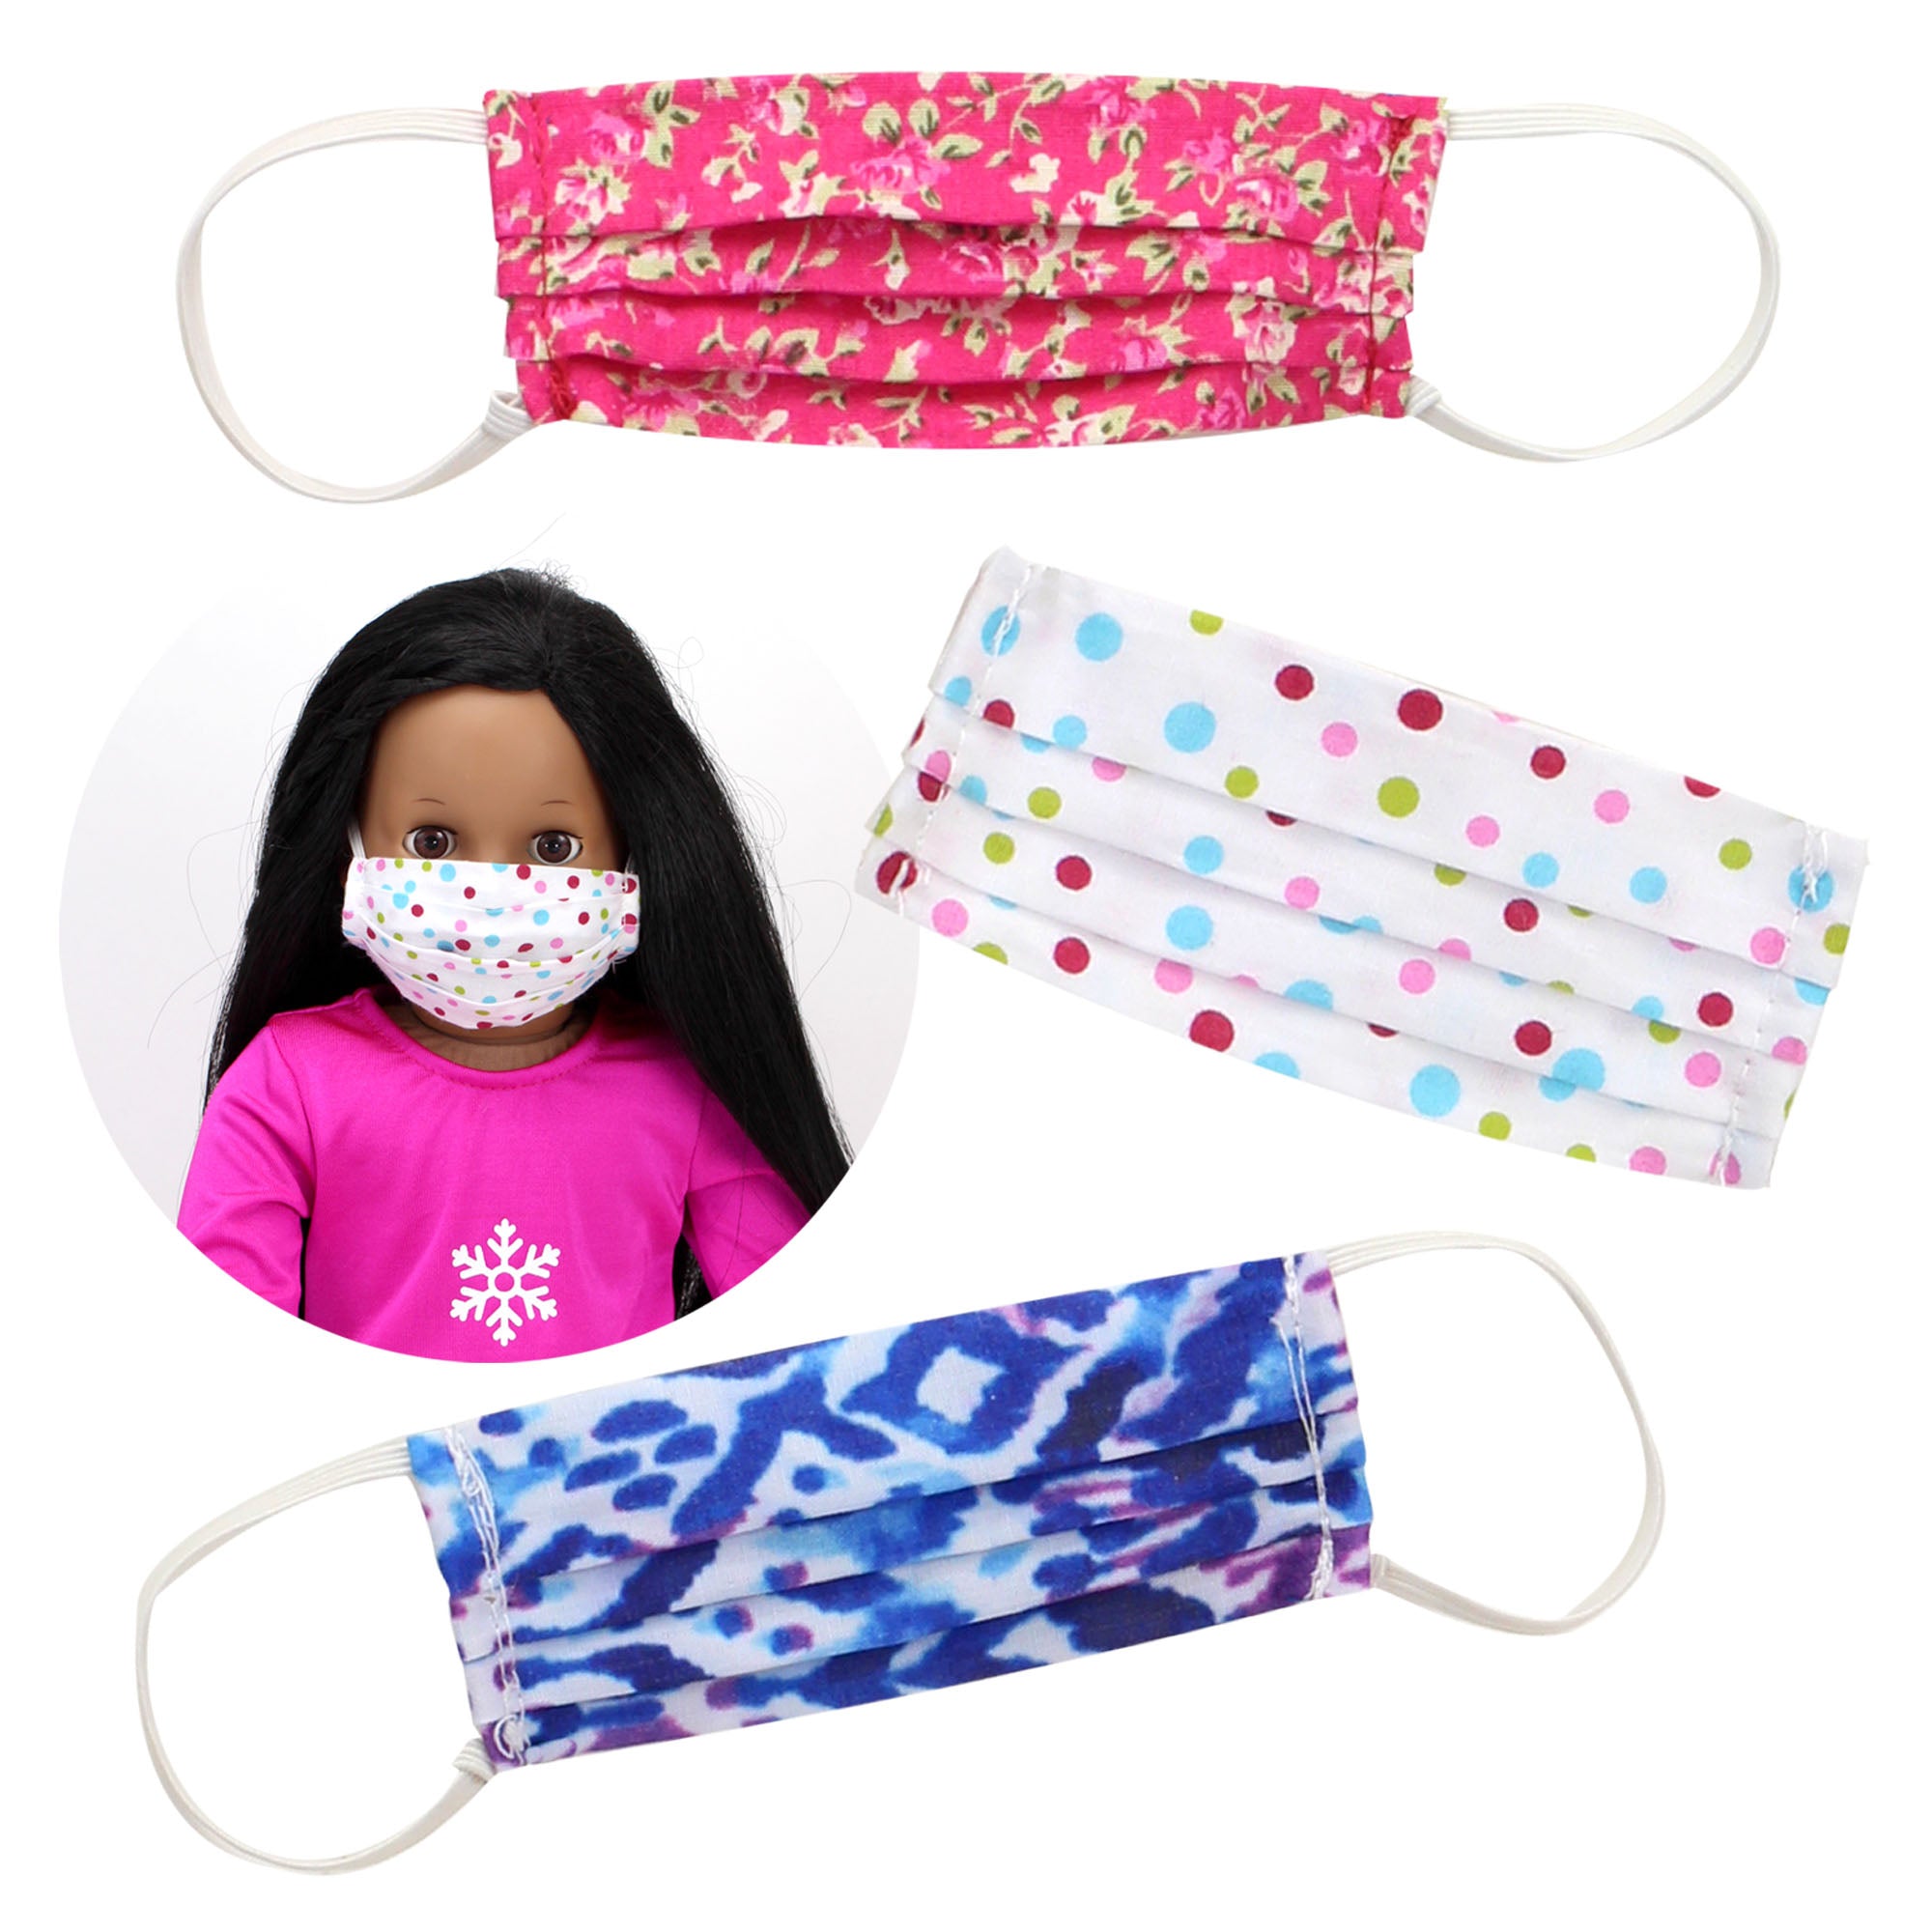 Sophia’s Set of 3 Mix & Match Printed Face Masks for 18” Dolls & Stuffed Animals, Multi